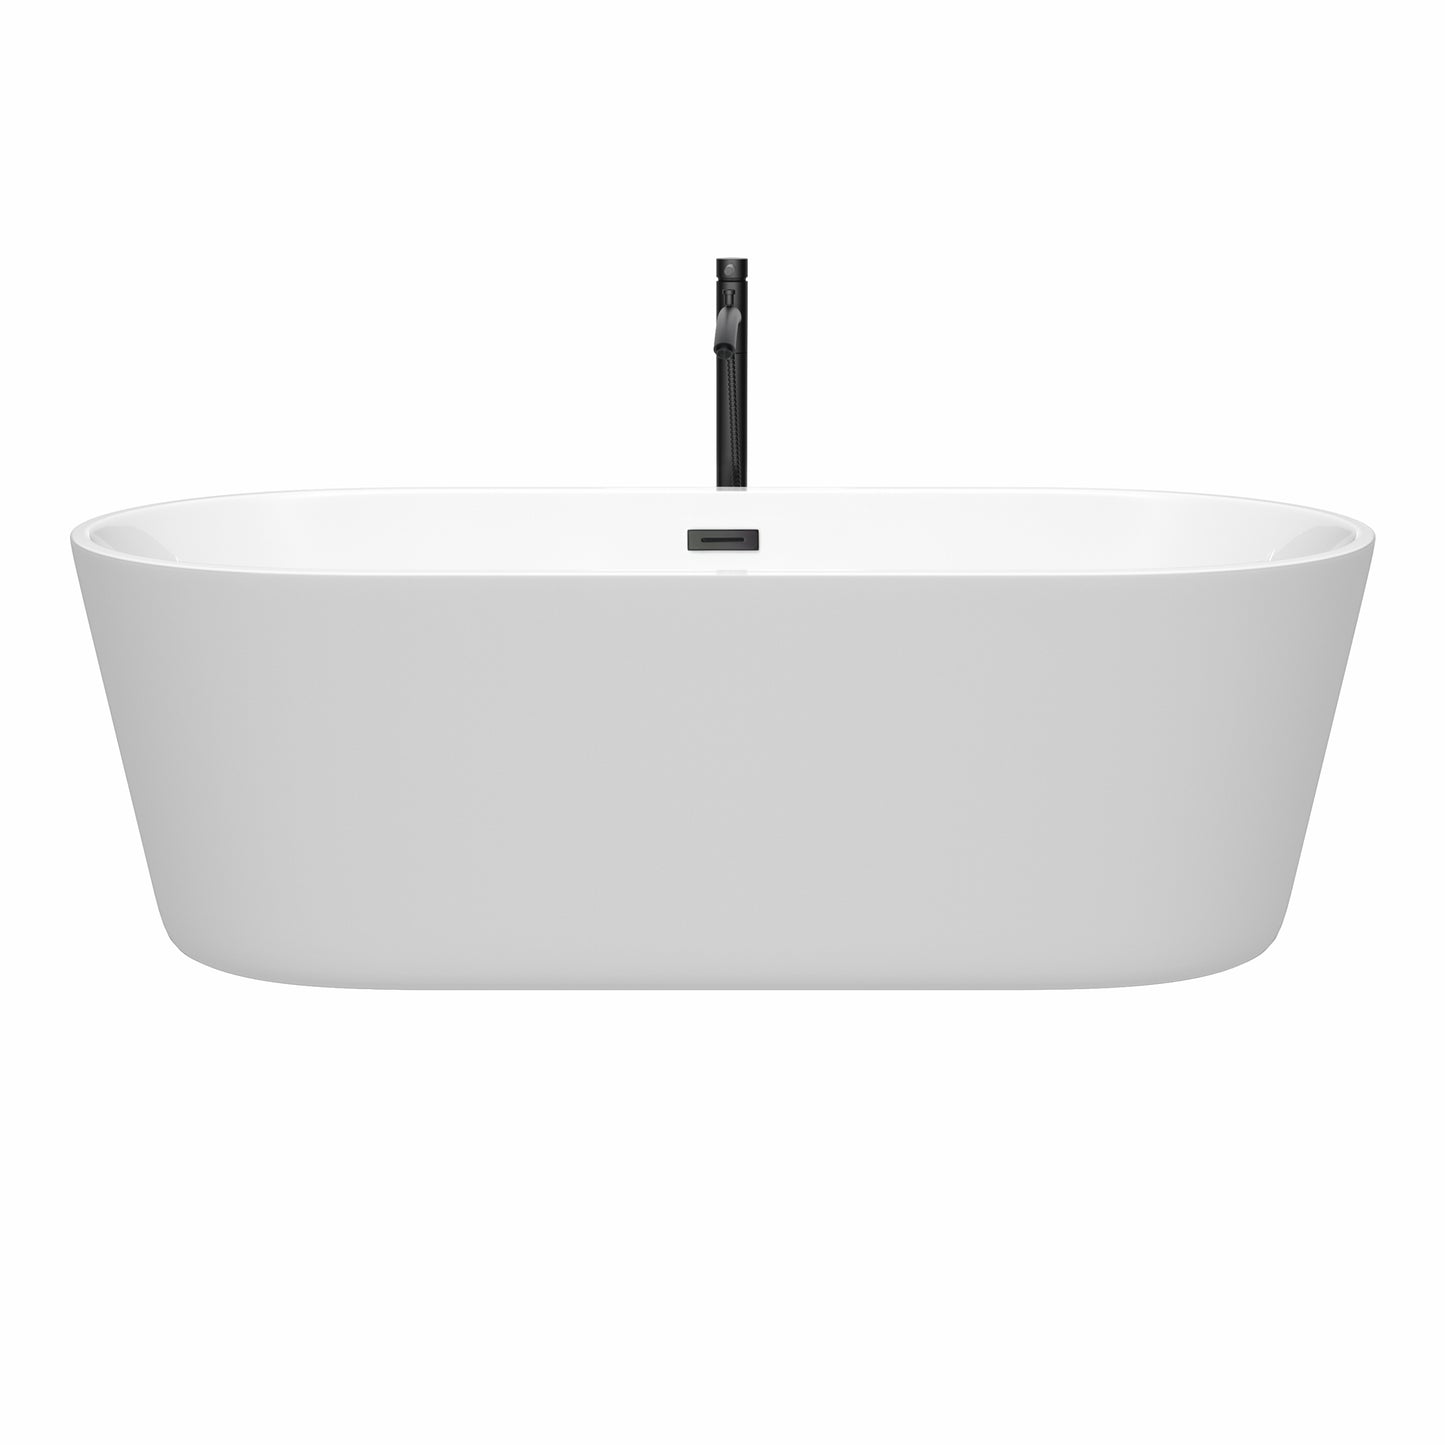 Wyndham Collection Carissa 71 Inch Freestanding Bathtub in White with Floor Mounted Faucet, Drain and Overflow Trim in Matte Black - Luxe Bathroom Vanities